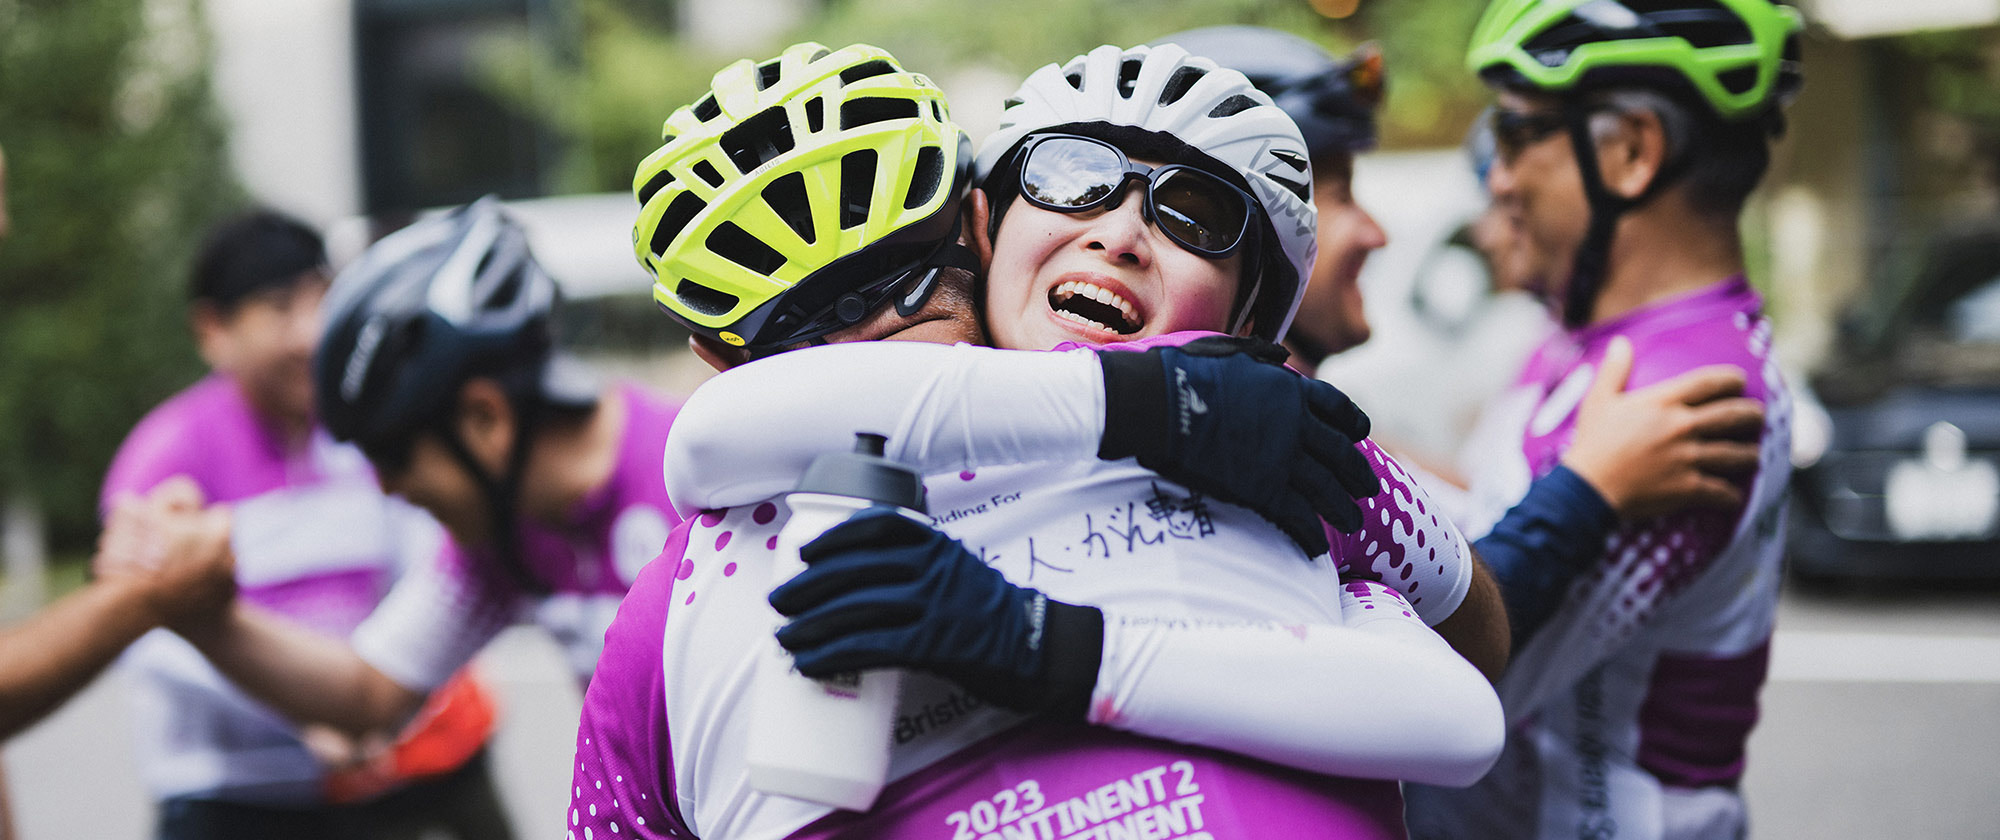 Two bike race riders sharing an emotional embrace